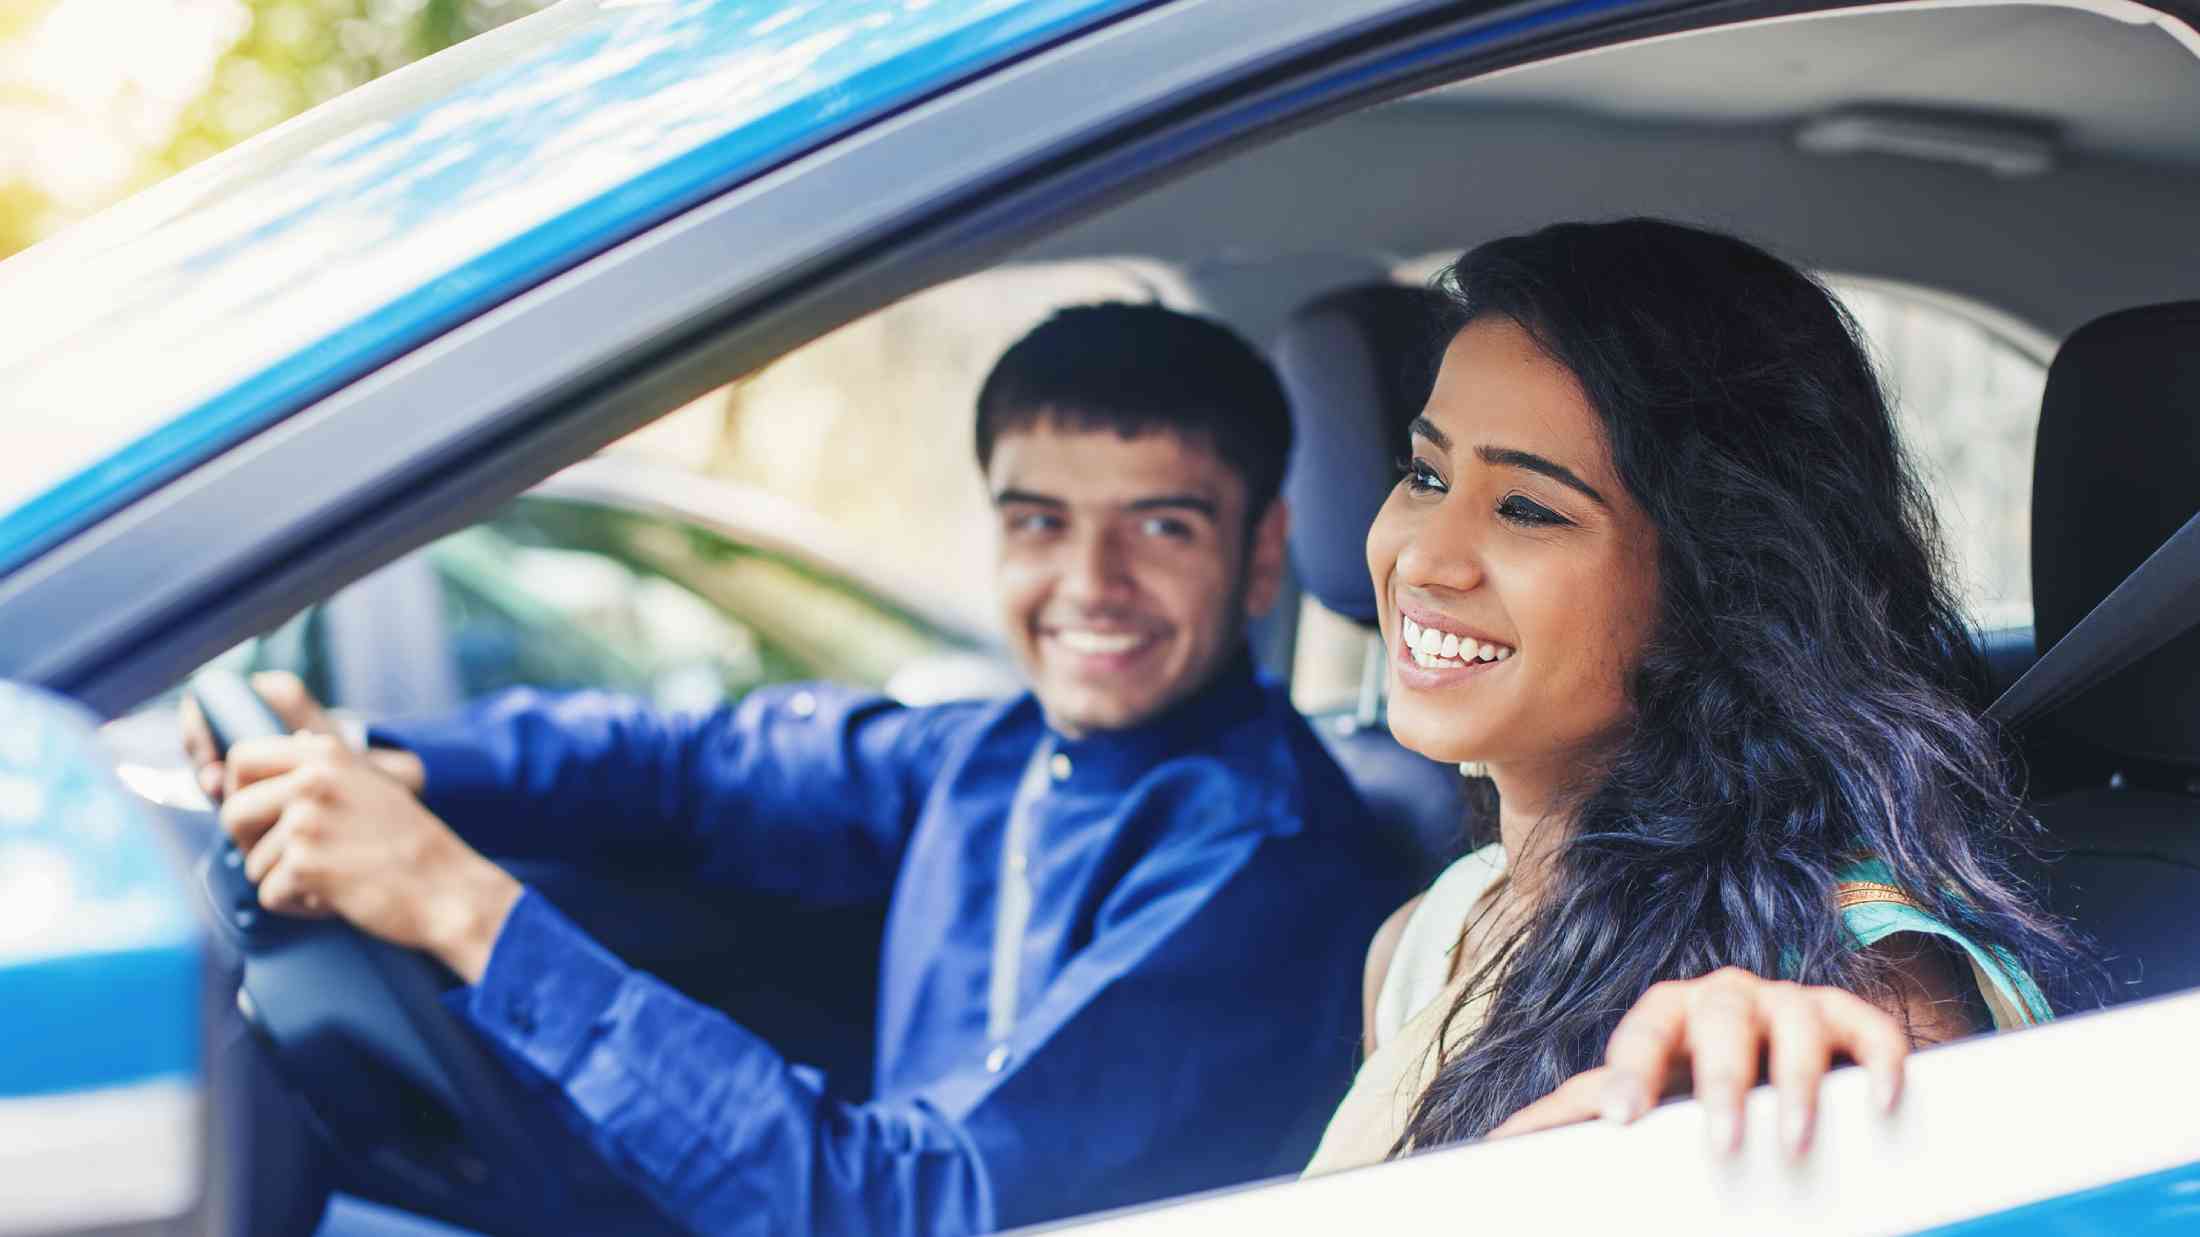 Young woman in a blue car being driven by an Indian man.jpg